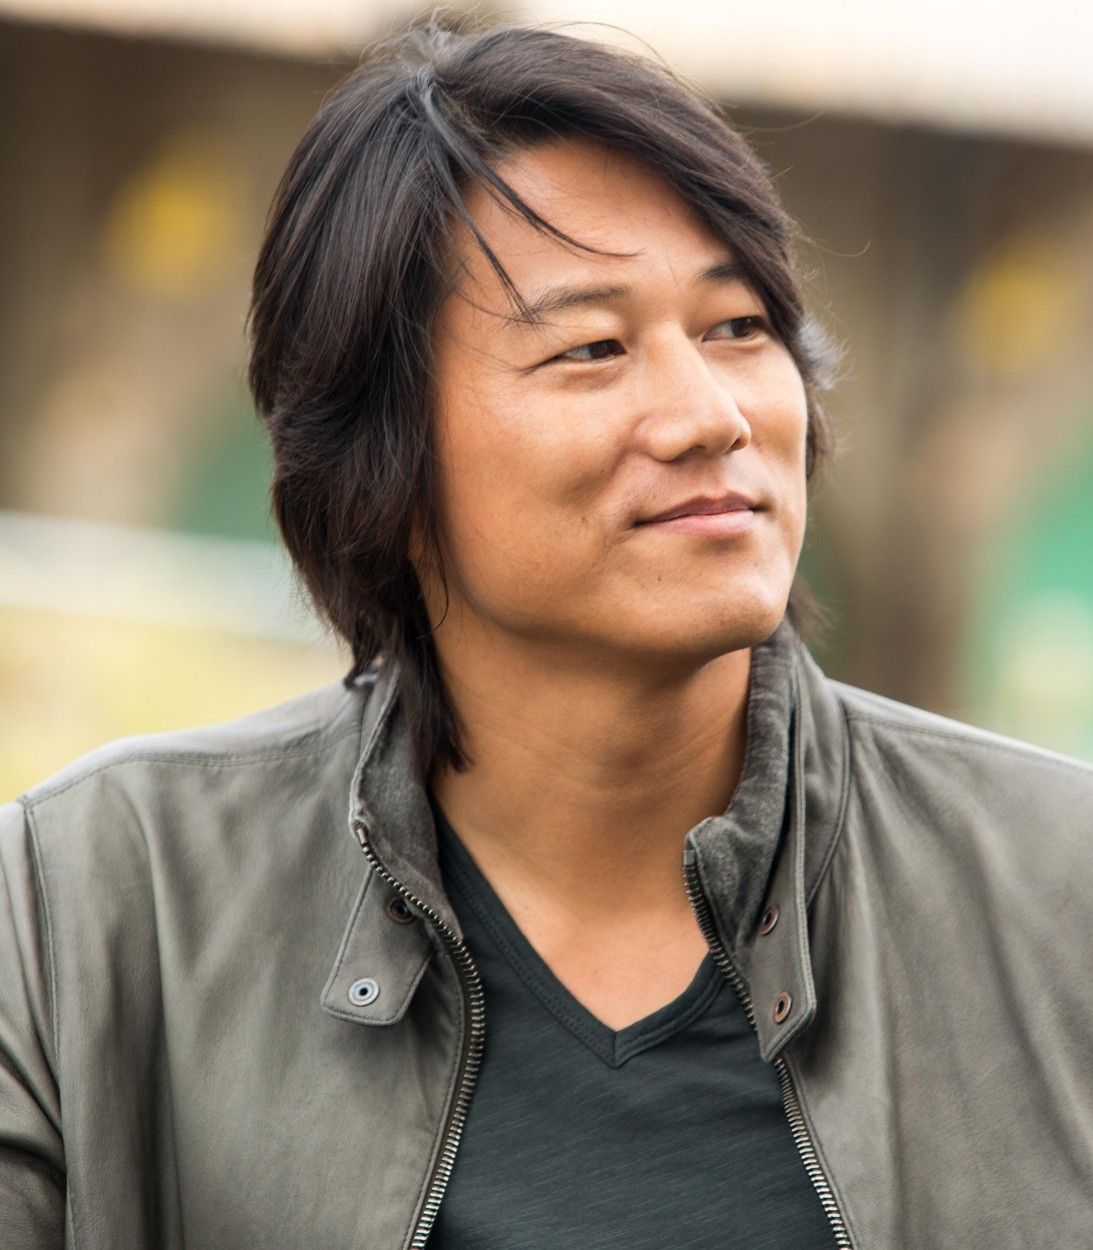 Sung Kang as Han in Fast and Furious 6 Vertical